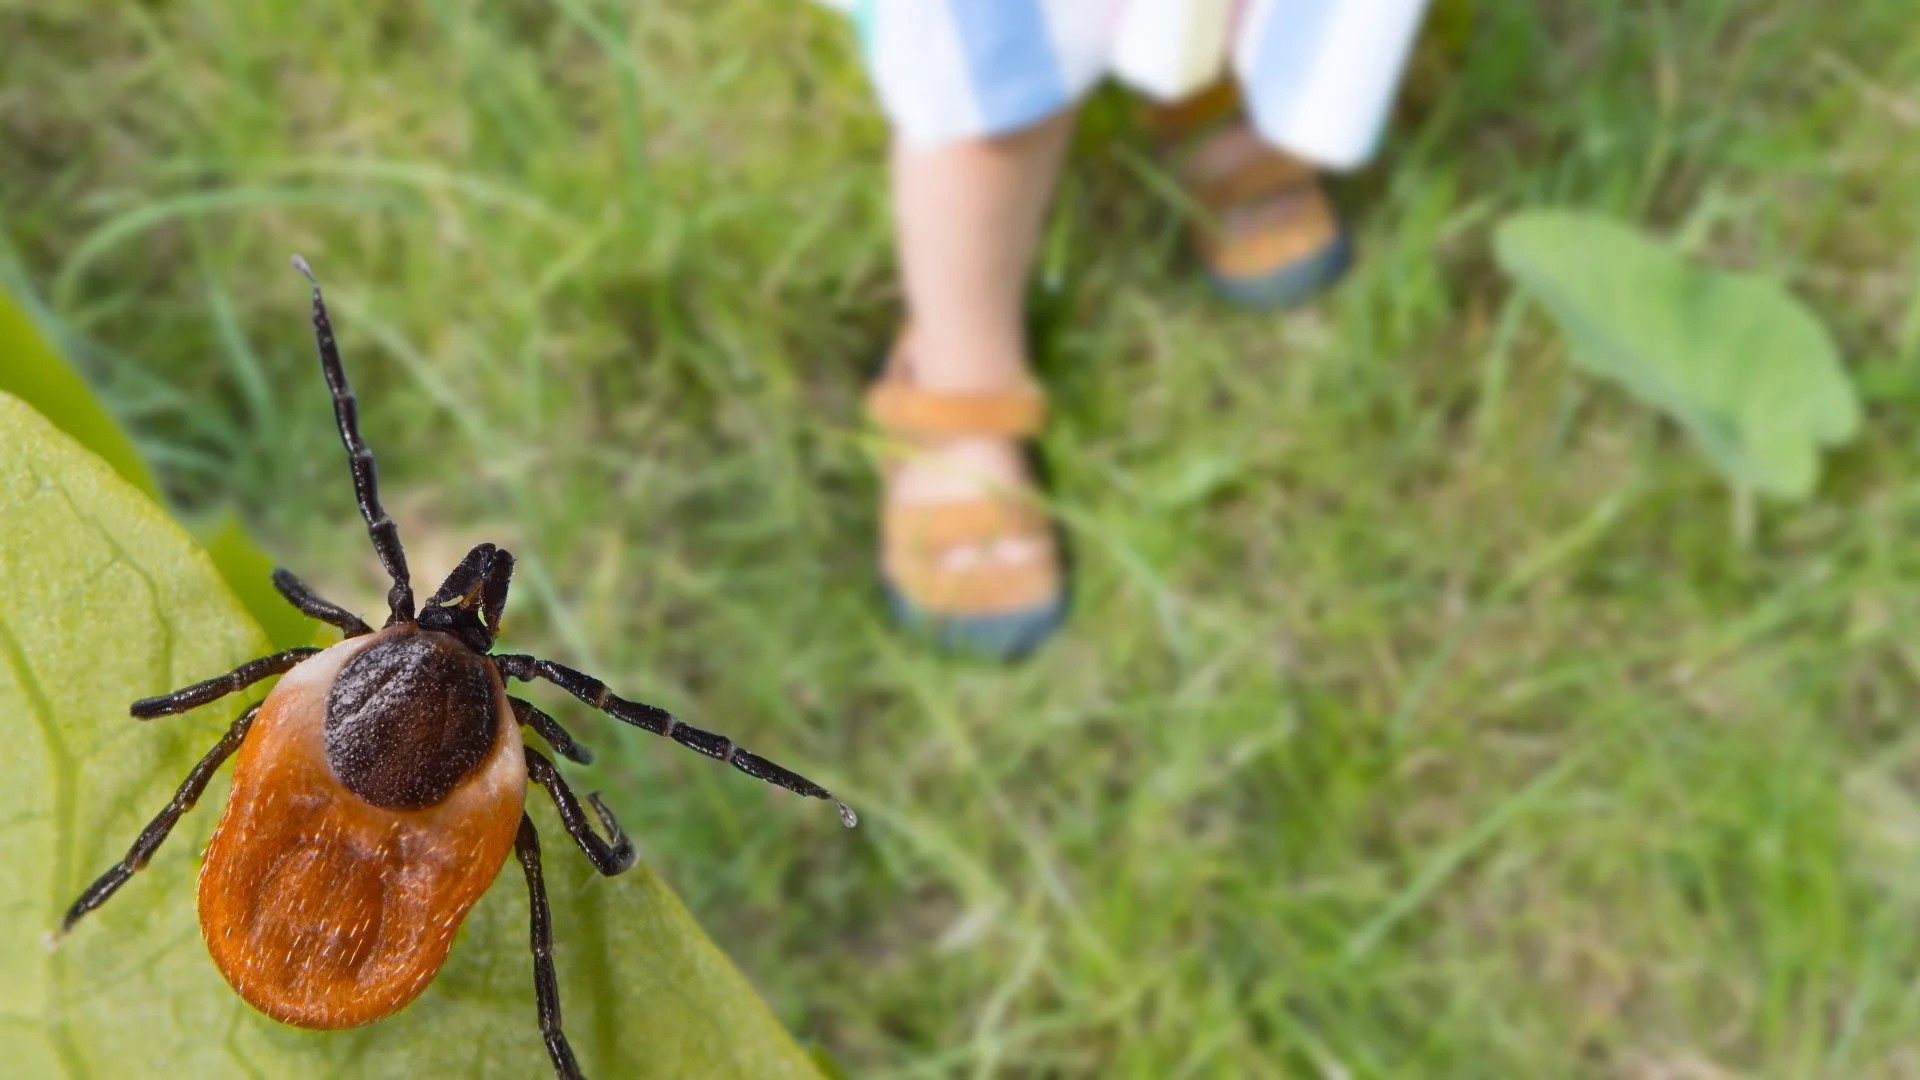 Tick Season Is Here - Mitigate Their Presence on Your Lawn With These 3 Tips